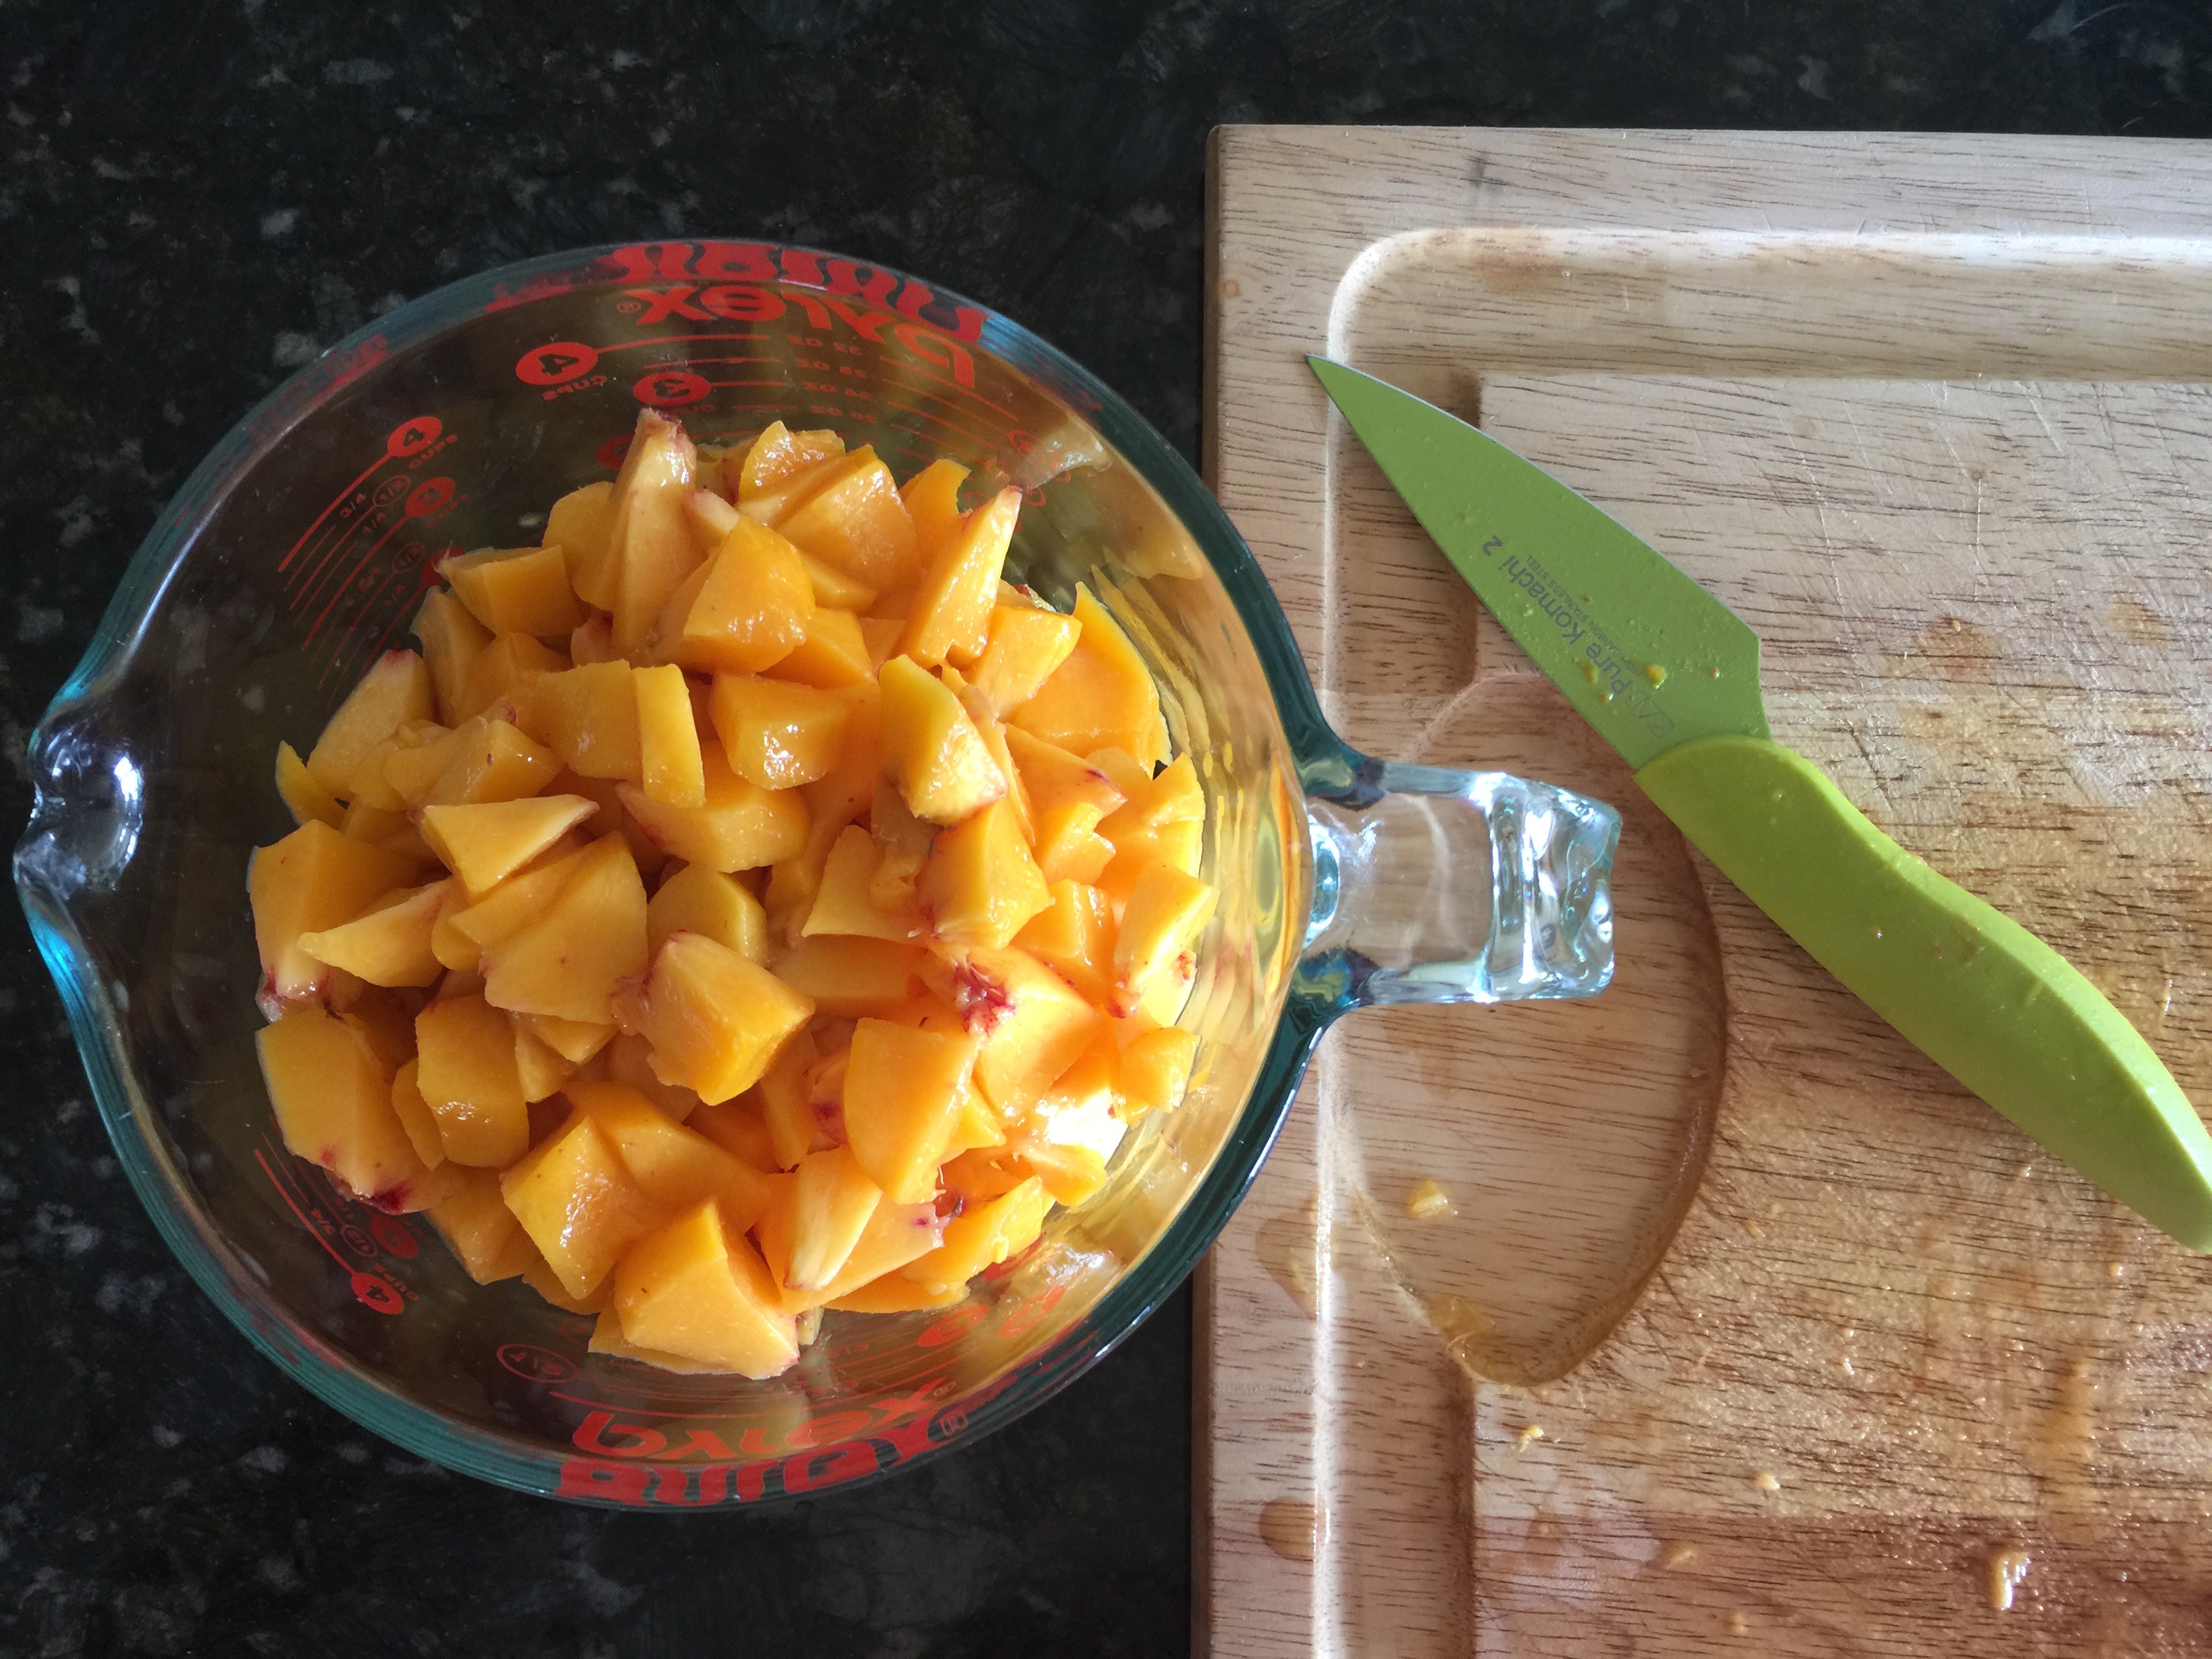 4 cups of juicy peaches - delicious!